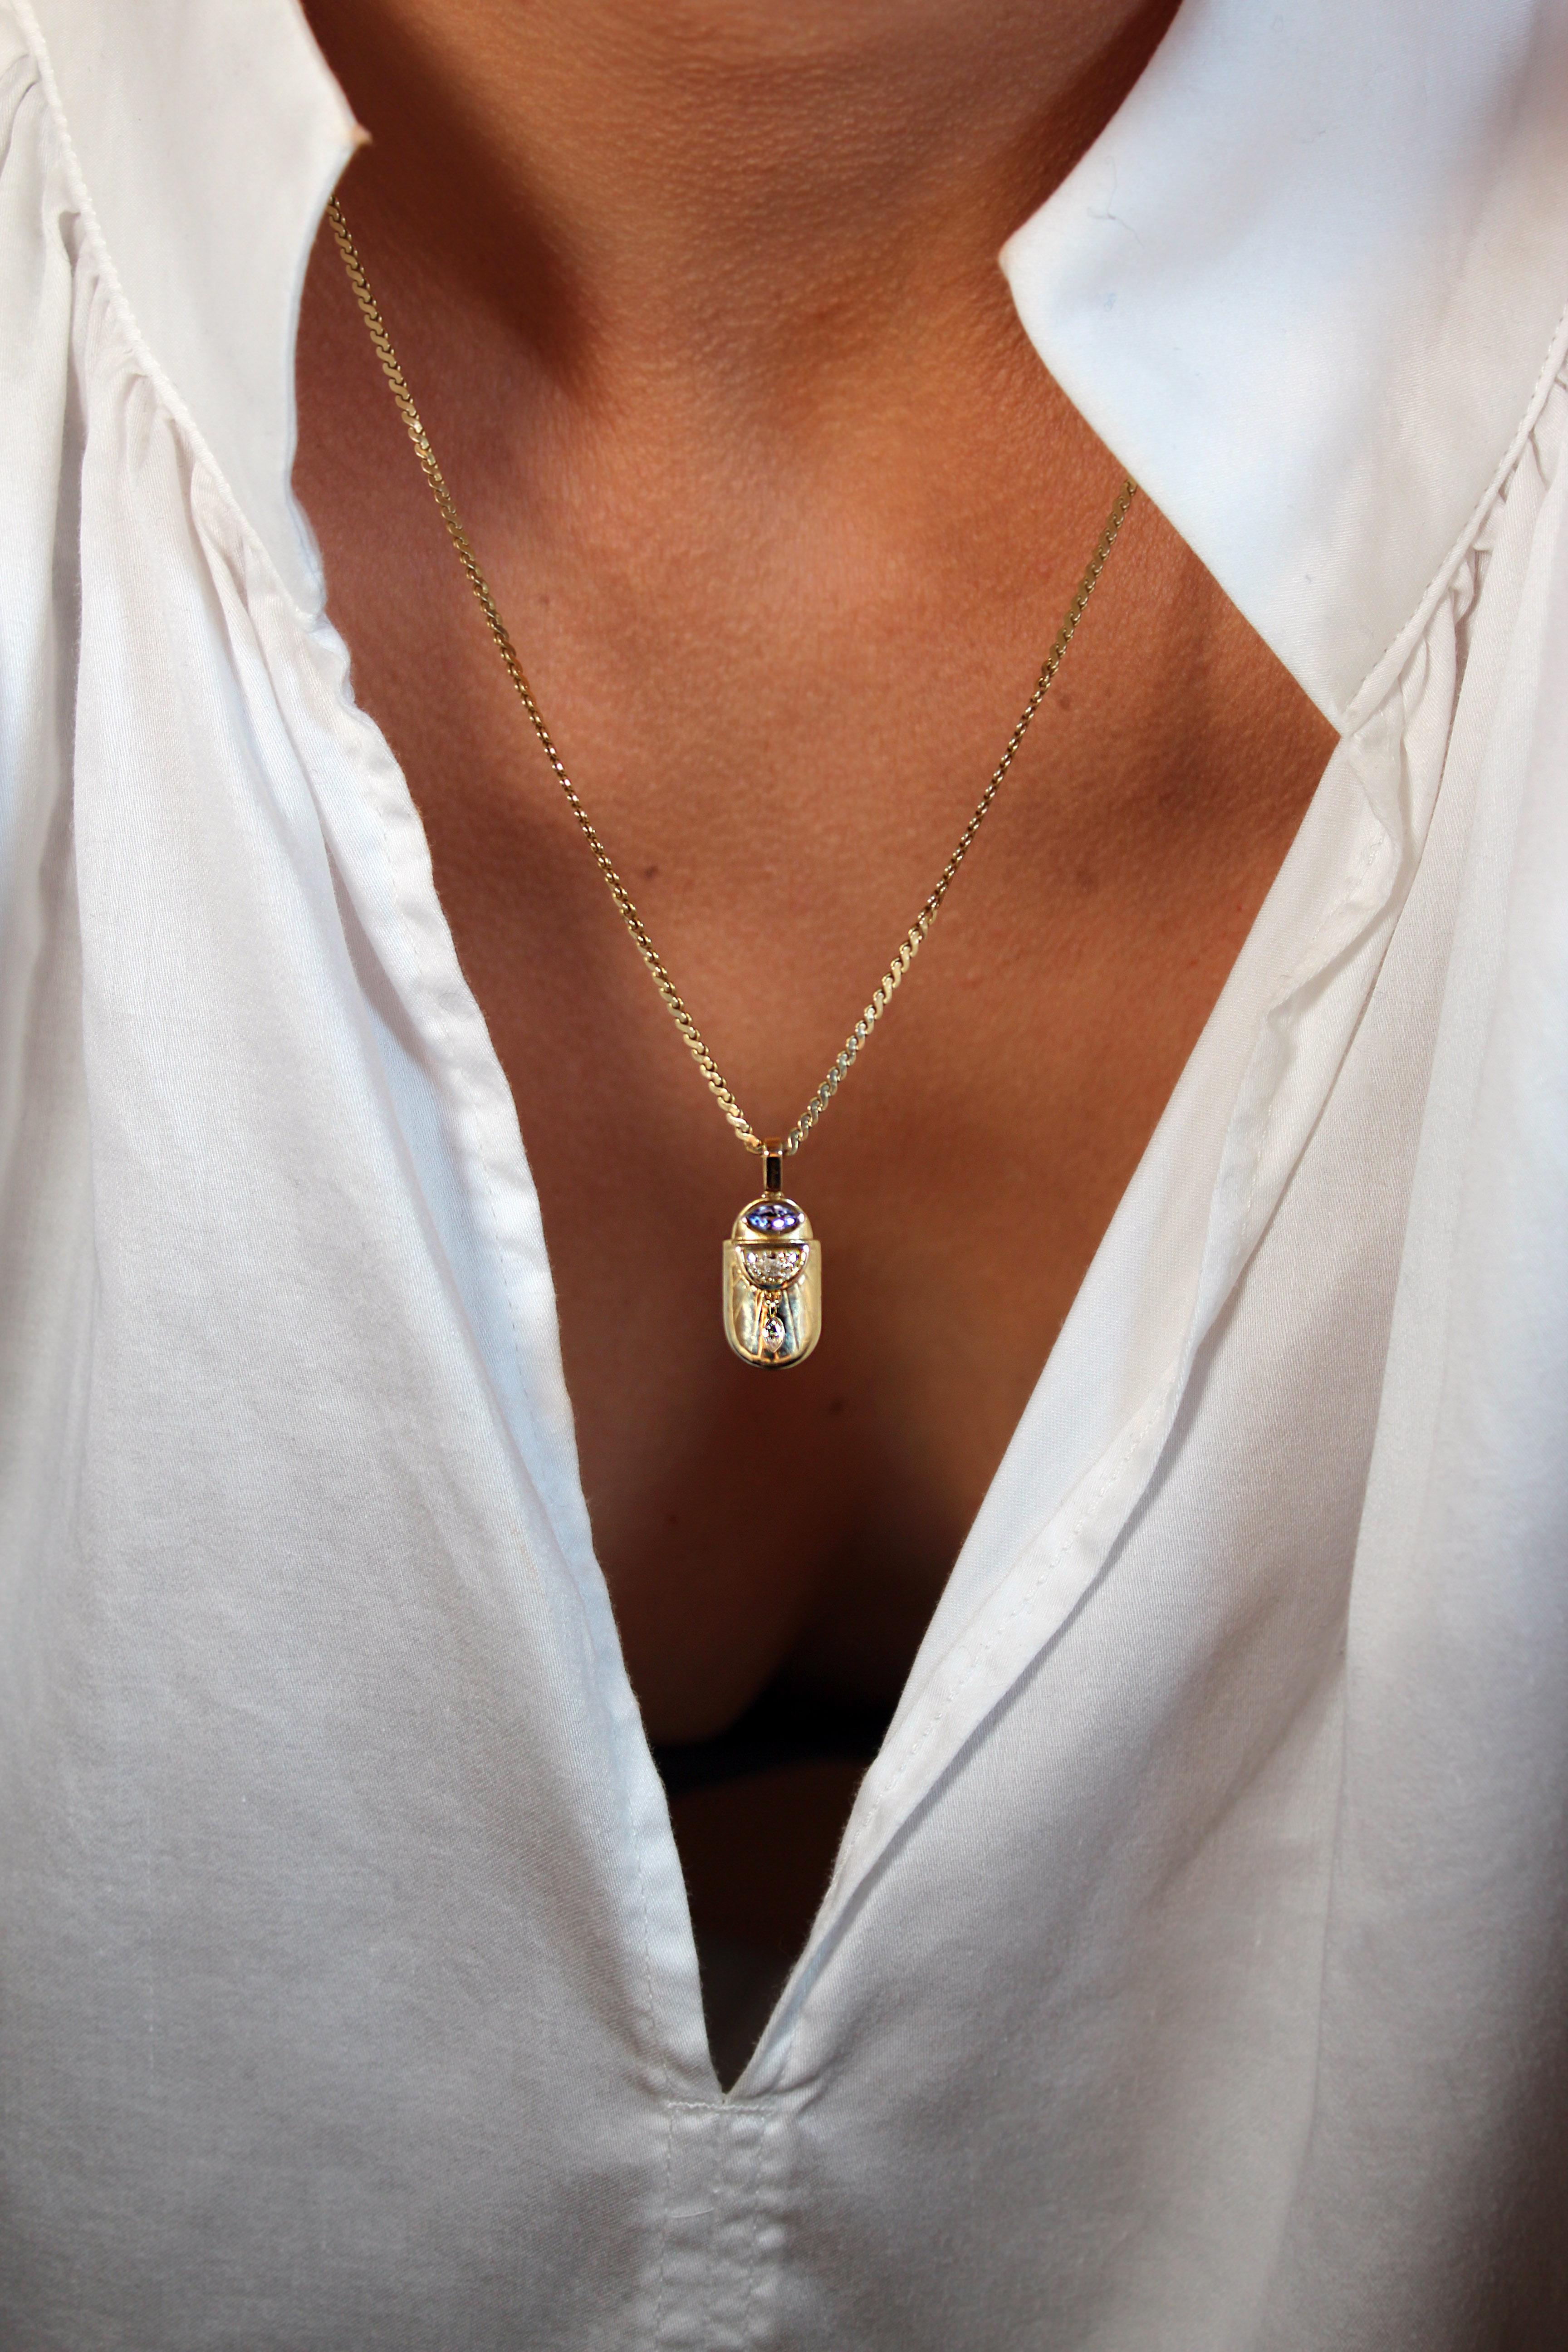 The form of a golden scarab, synonymous with the solar cycle in ancient Egypt, is the basis of this elegant and playful pendant. Sunrays run engraved along its gleaming back, above which sits a half moon-shaped lab diamond, and a marquise tanzanite